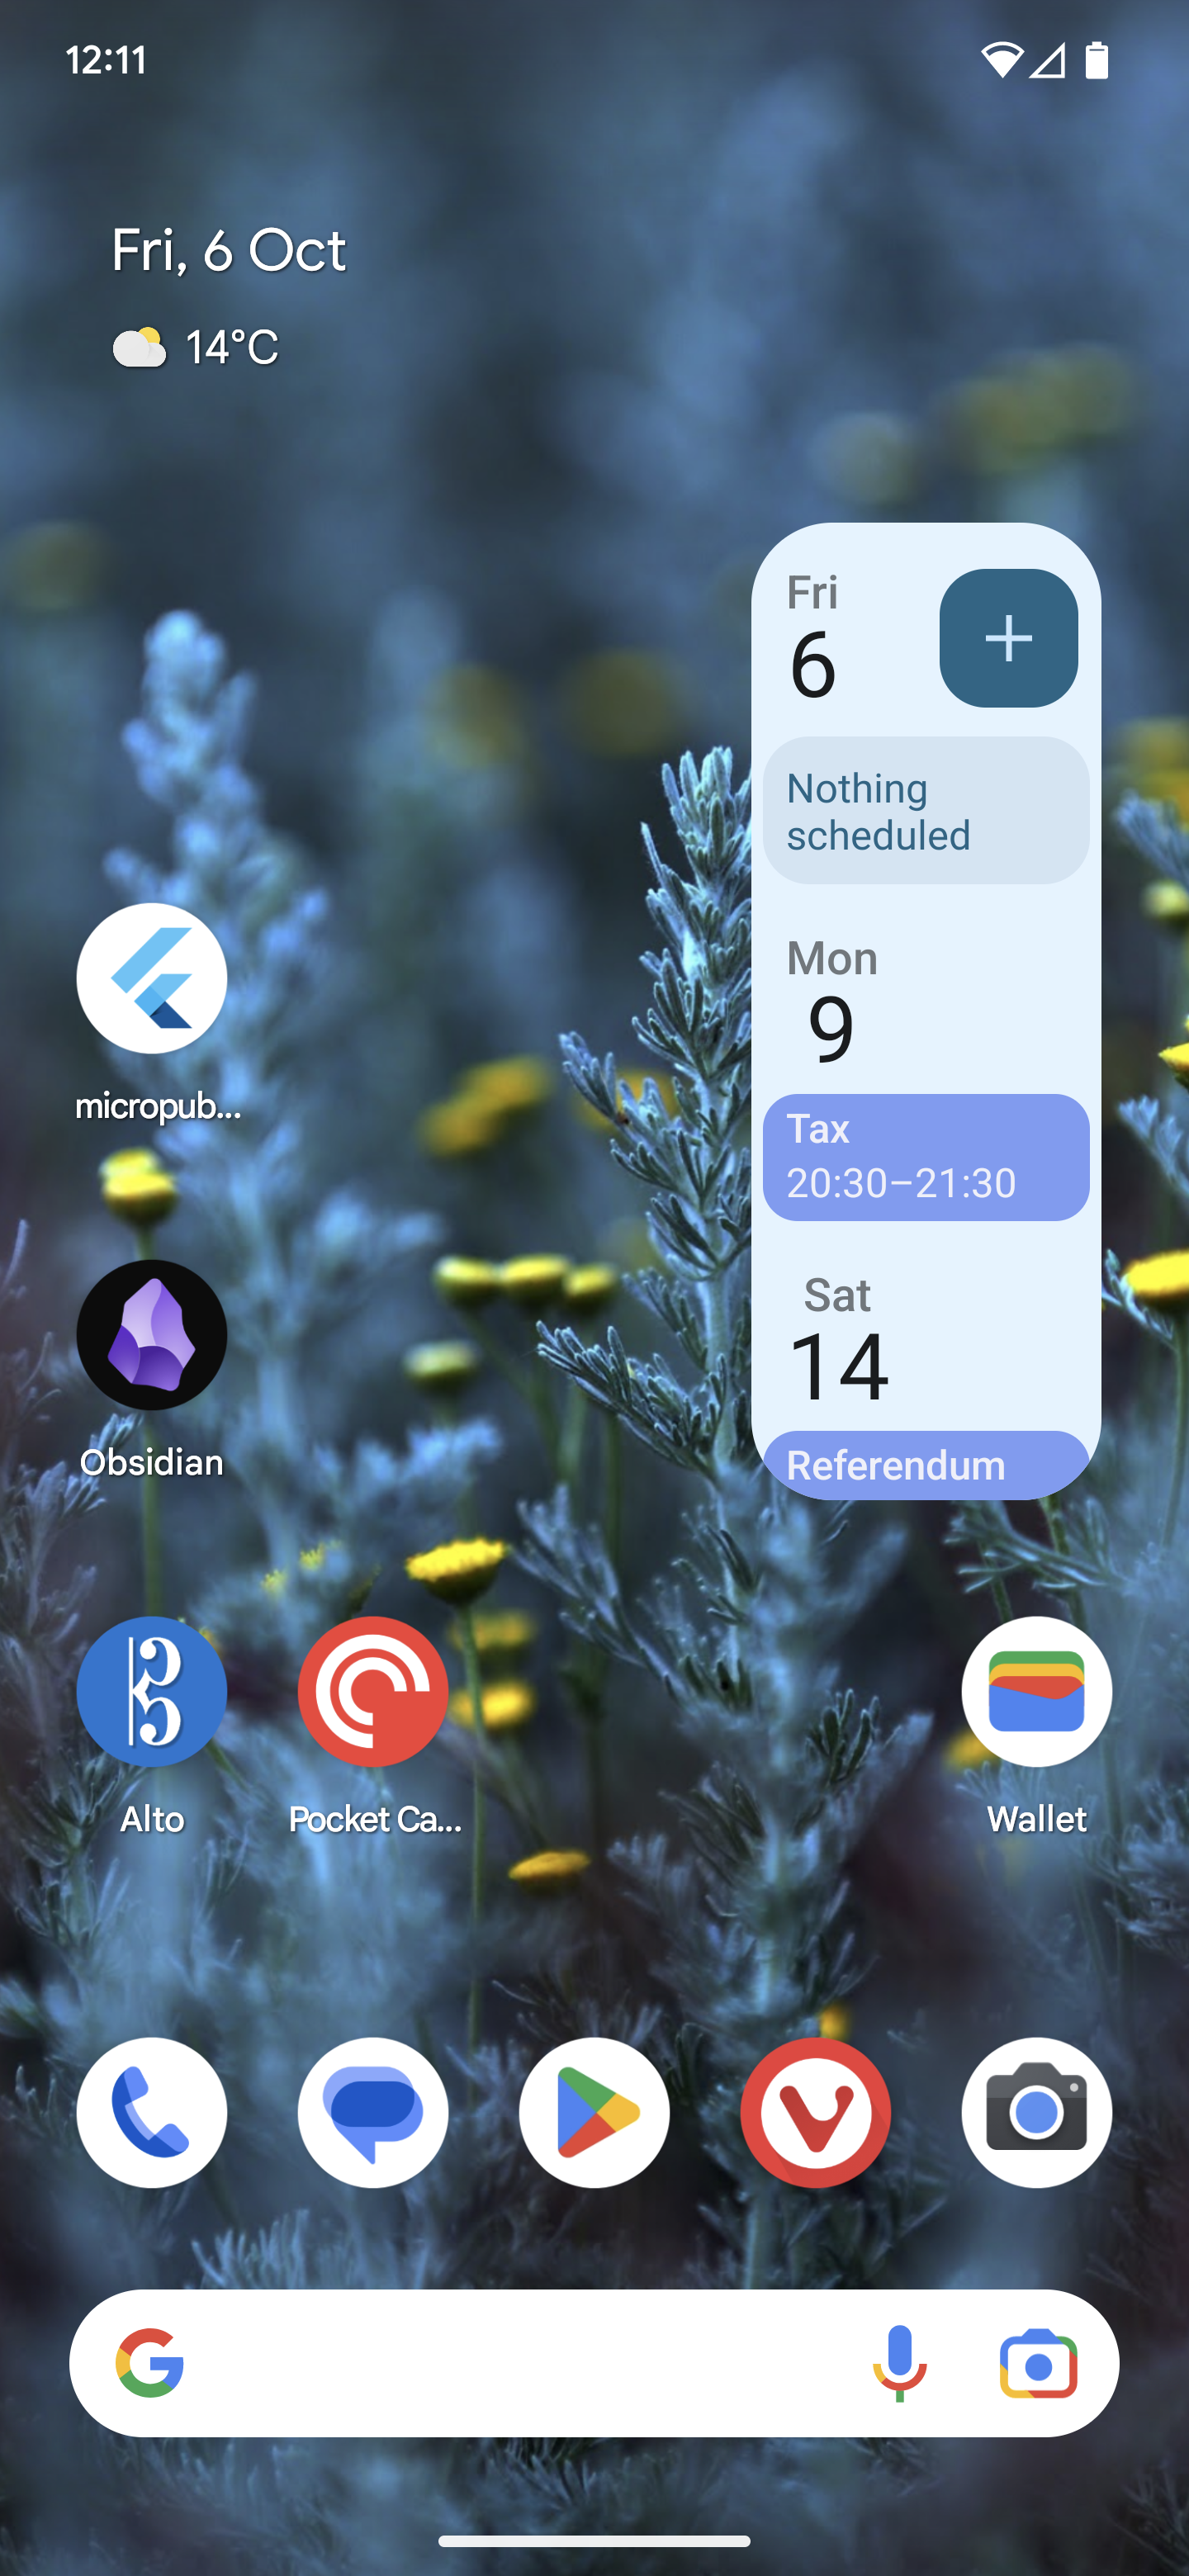 An Android phone screen with the same calendar widget functioning normally: it has the current date, a message saying 'Nothing scheduled', and two entries in blue for dates in the future